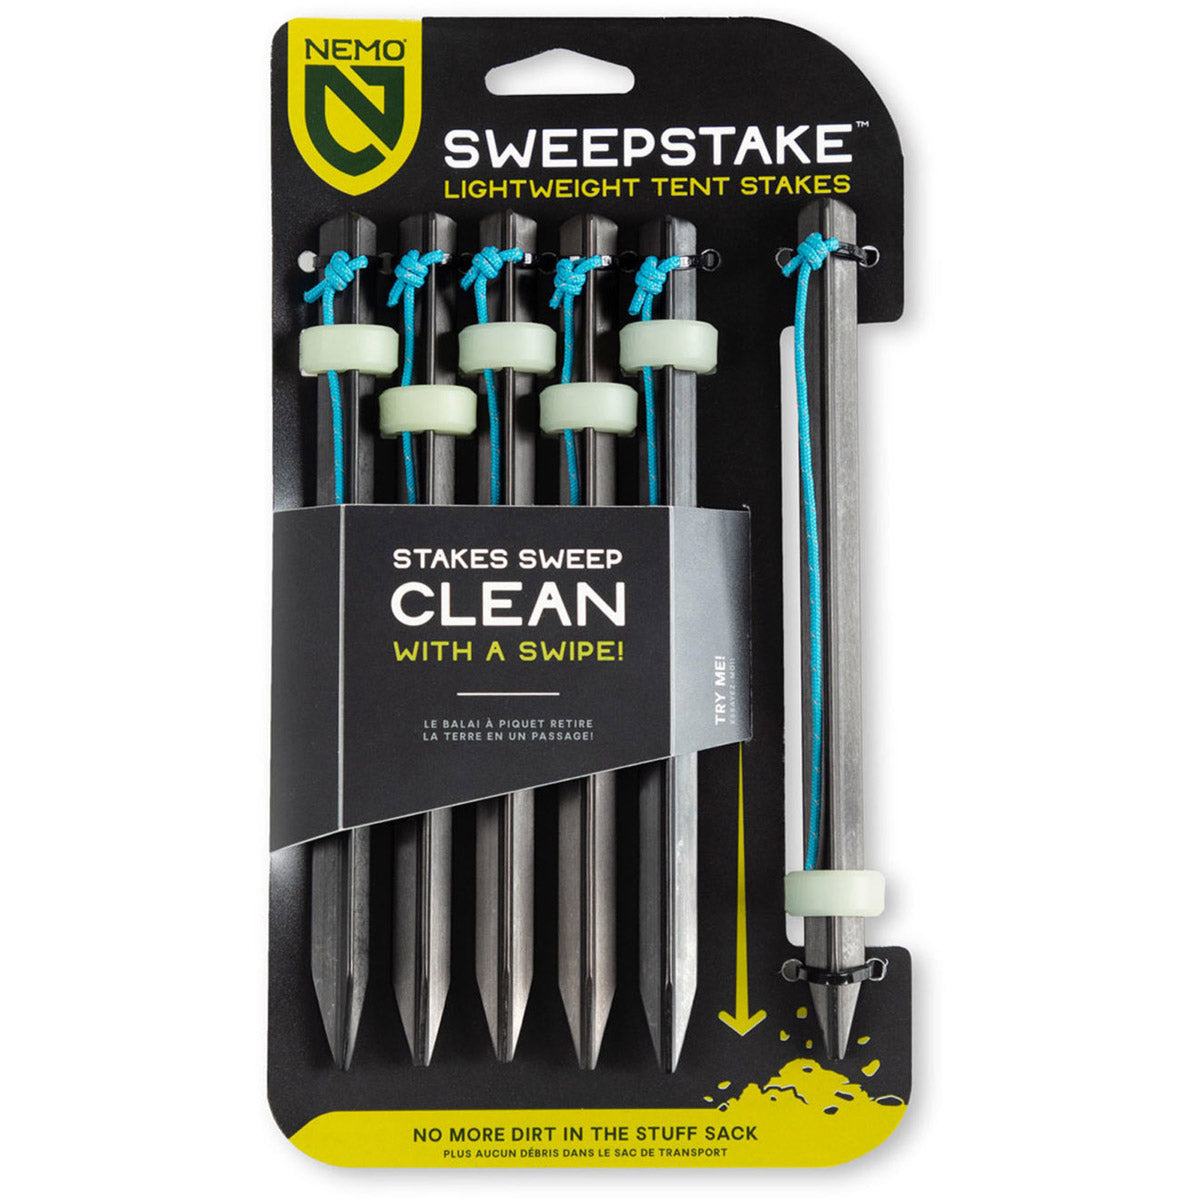 Sweepstake Lightweight Tent Stakes 6-Pack